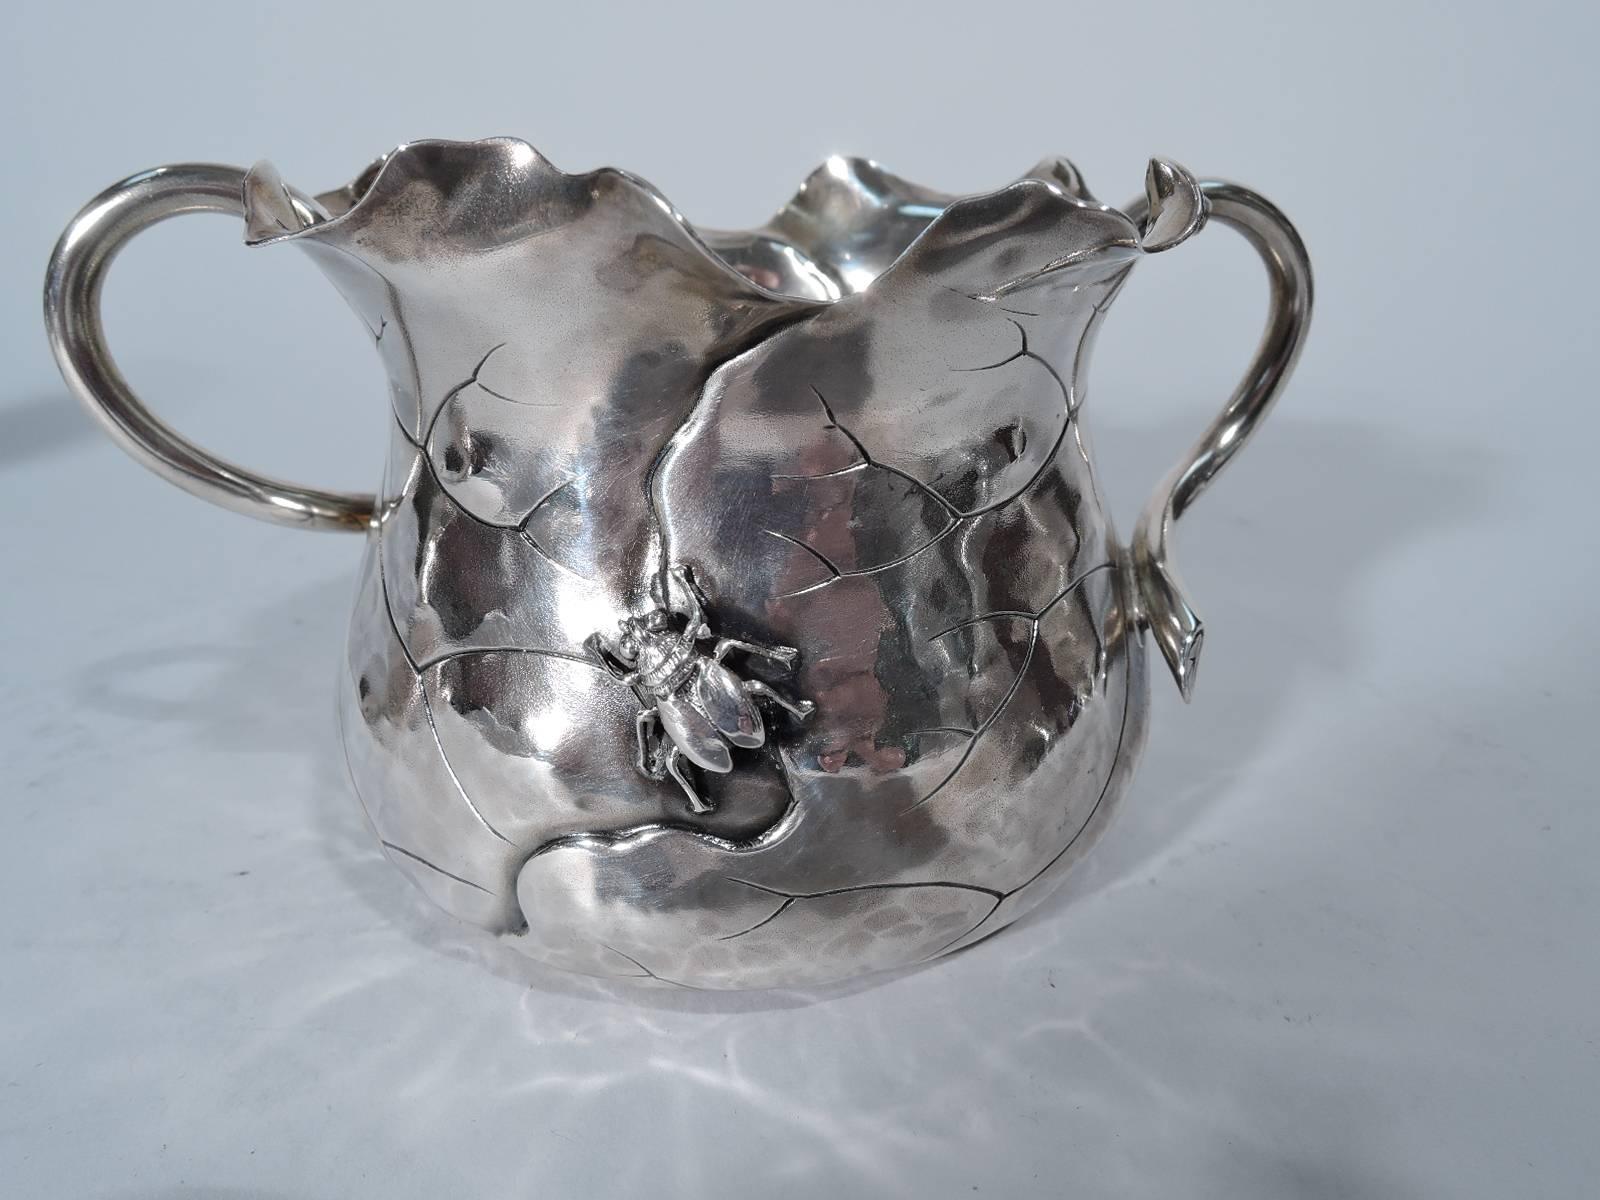 19th Century Shiebler Japonesque Sterling Silver Creamer and Sugar with Applied Bugs